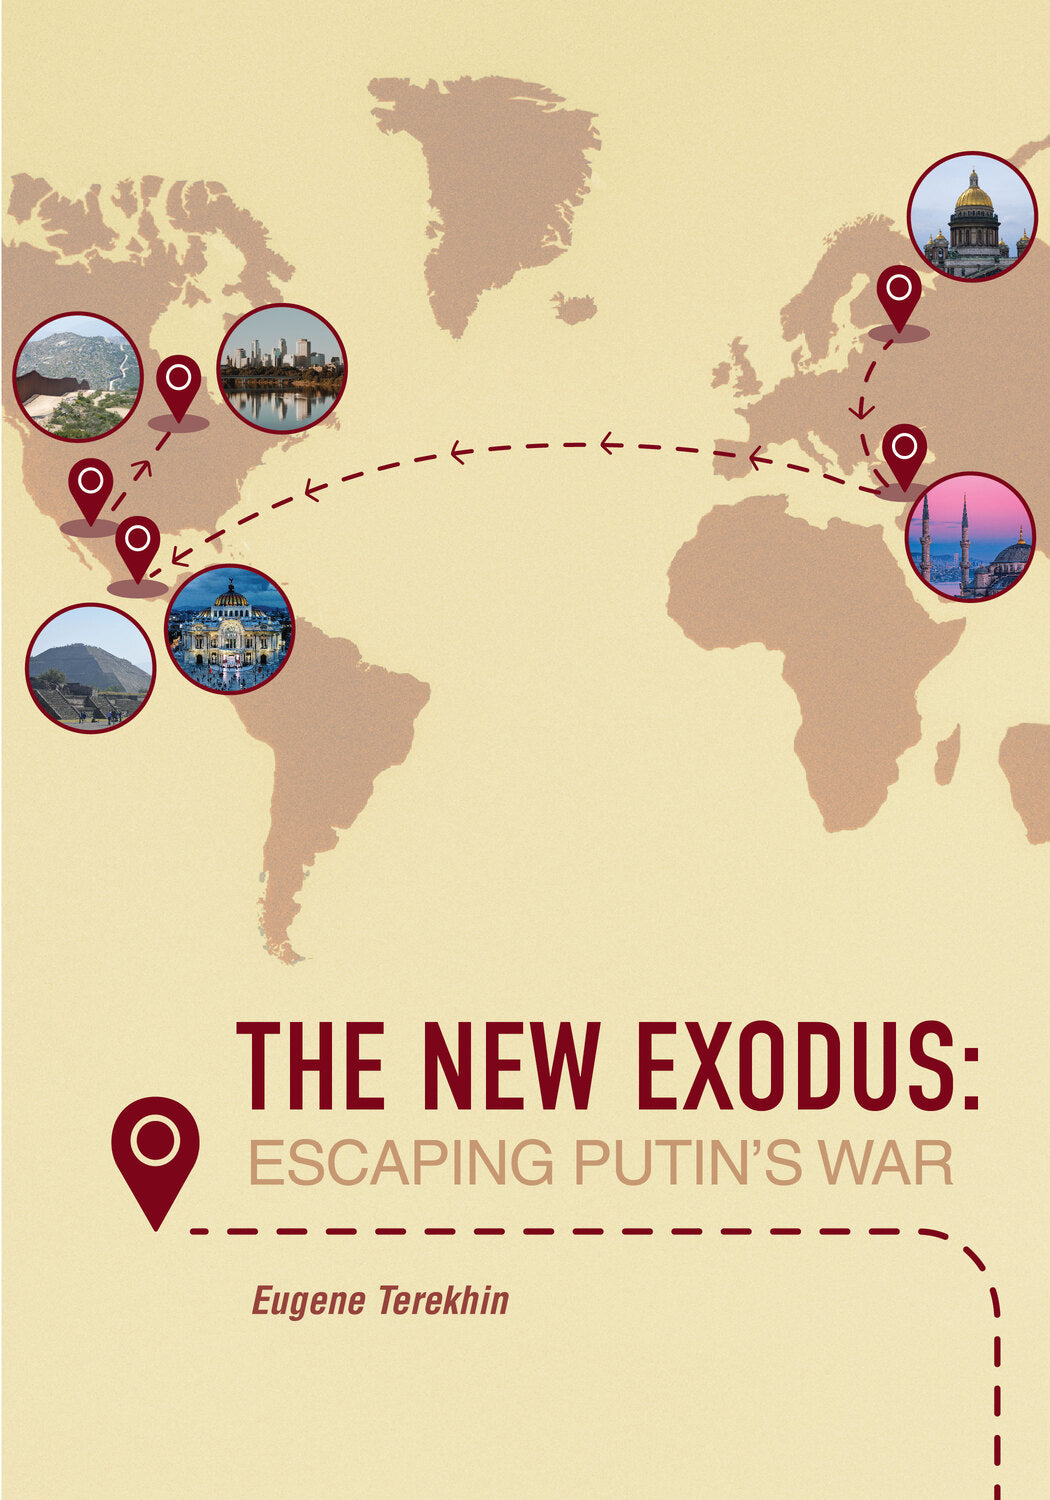 The New Exodus: Escaping Putin's War (paperback)